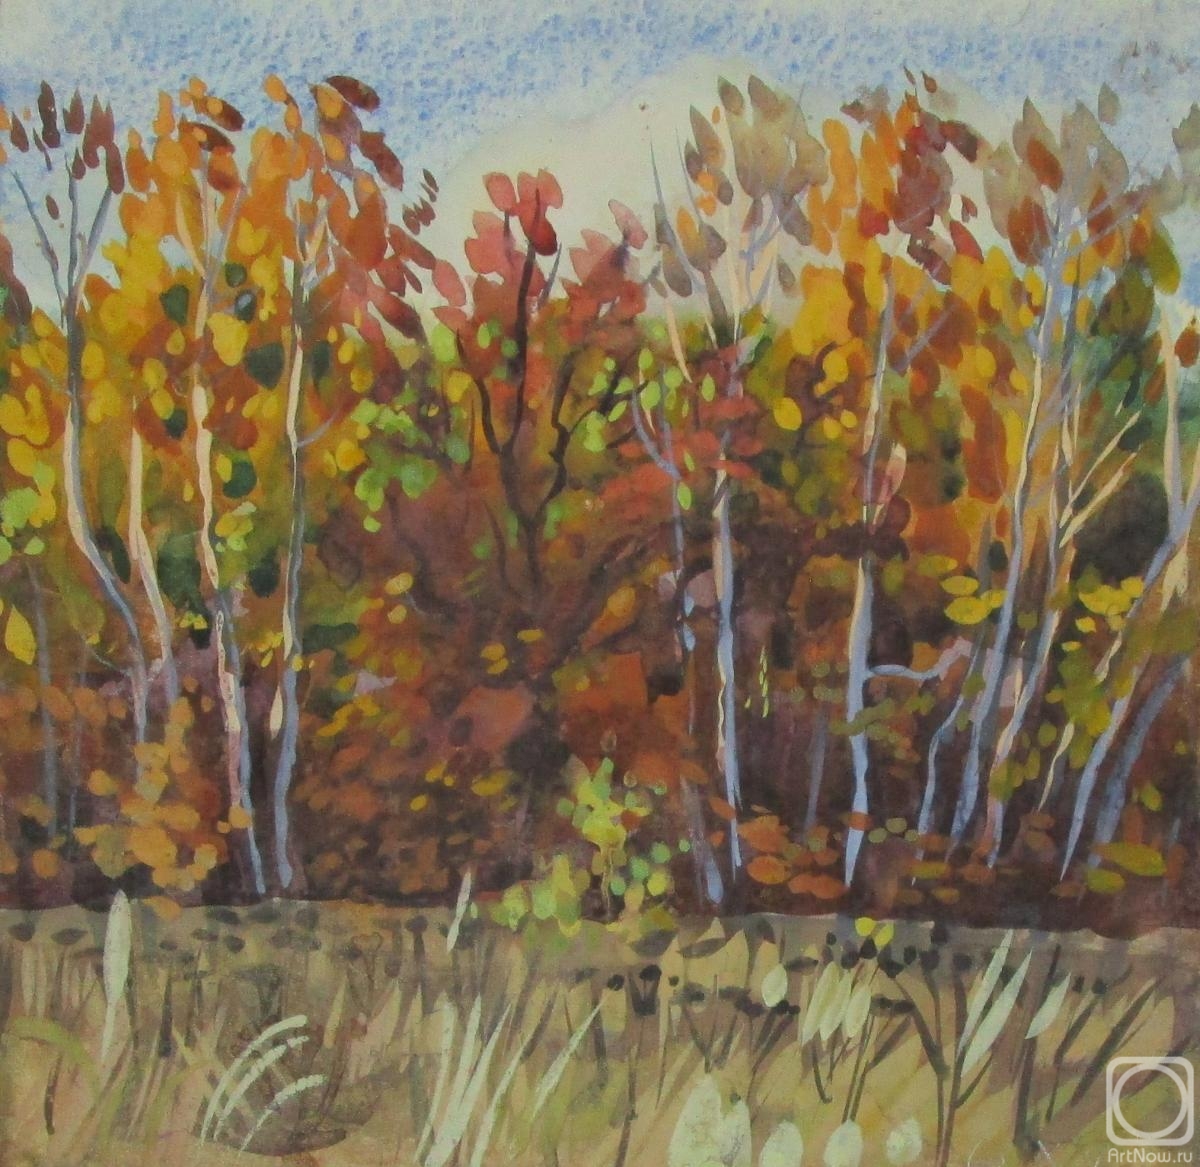 Dobrovolskaya Gayane. Oak and birches at the edge of the forest, October